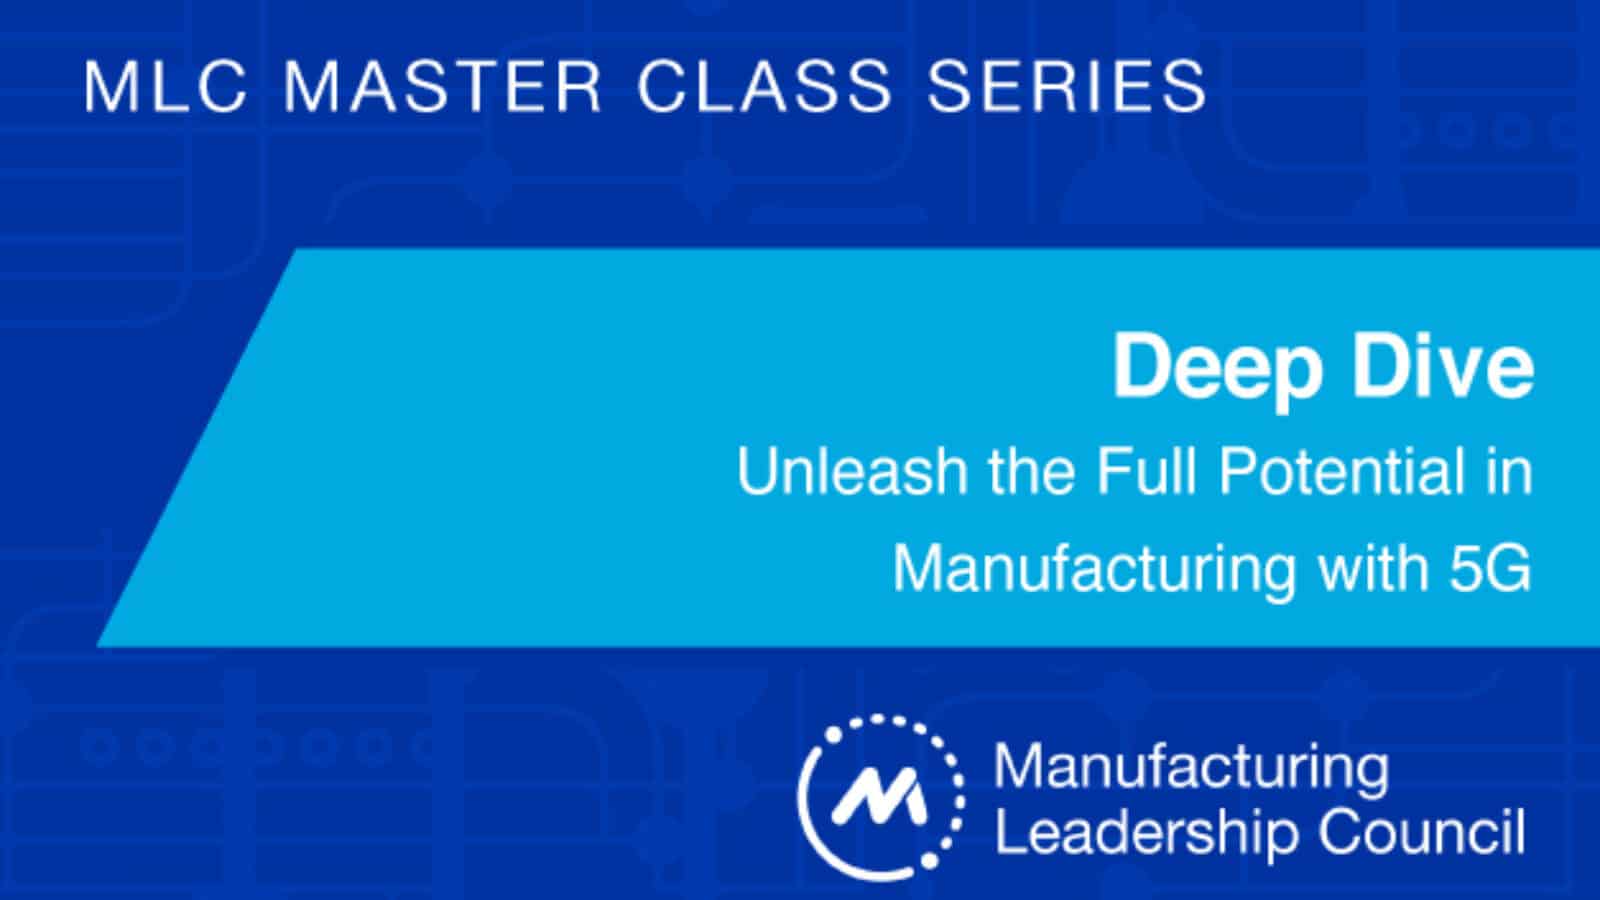 MLC Master Class Deep Dive: Unleash the Full Potential in Manufacturing with 5G